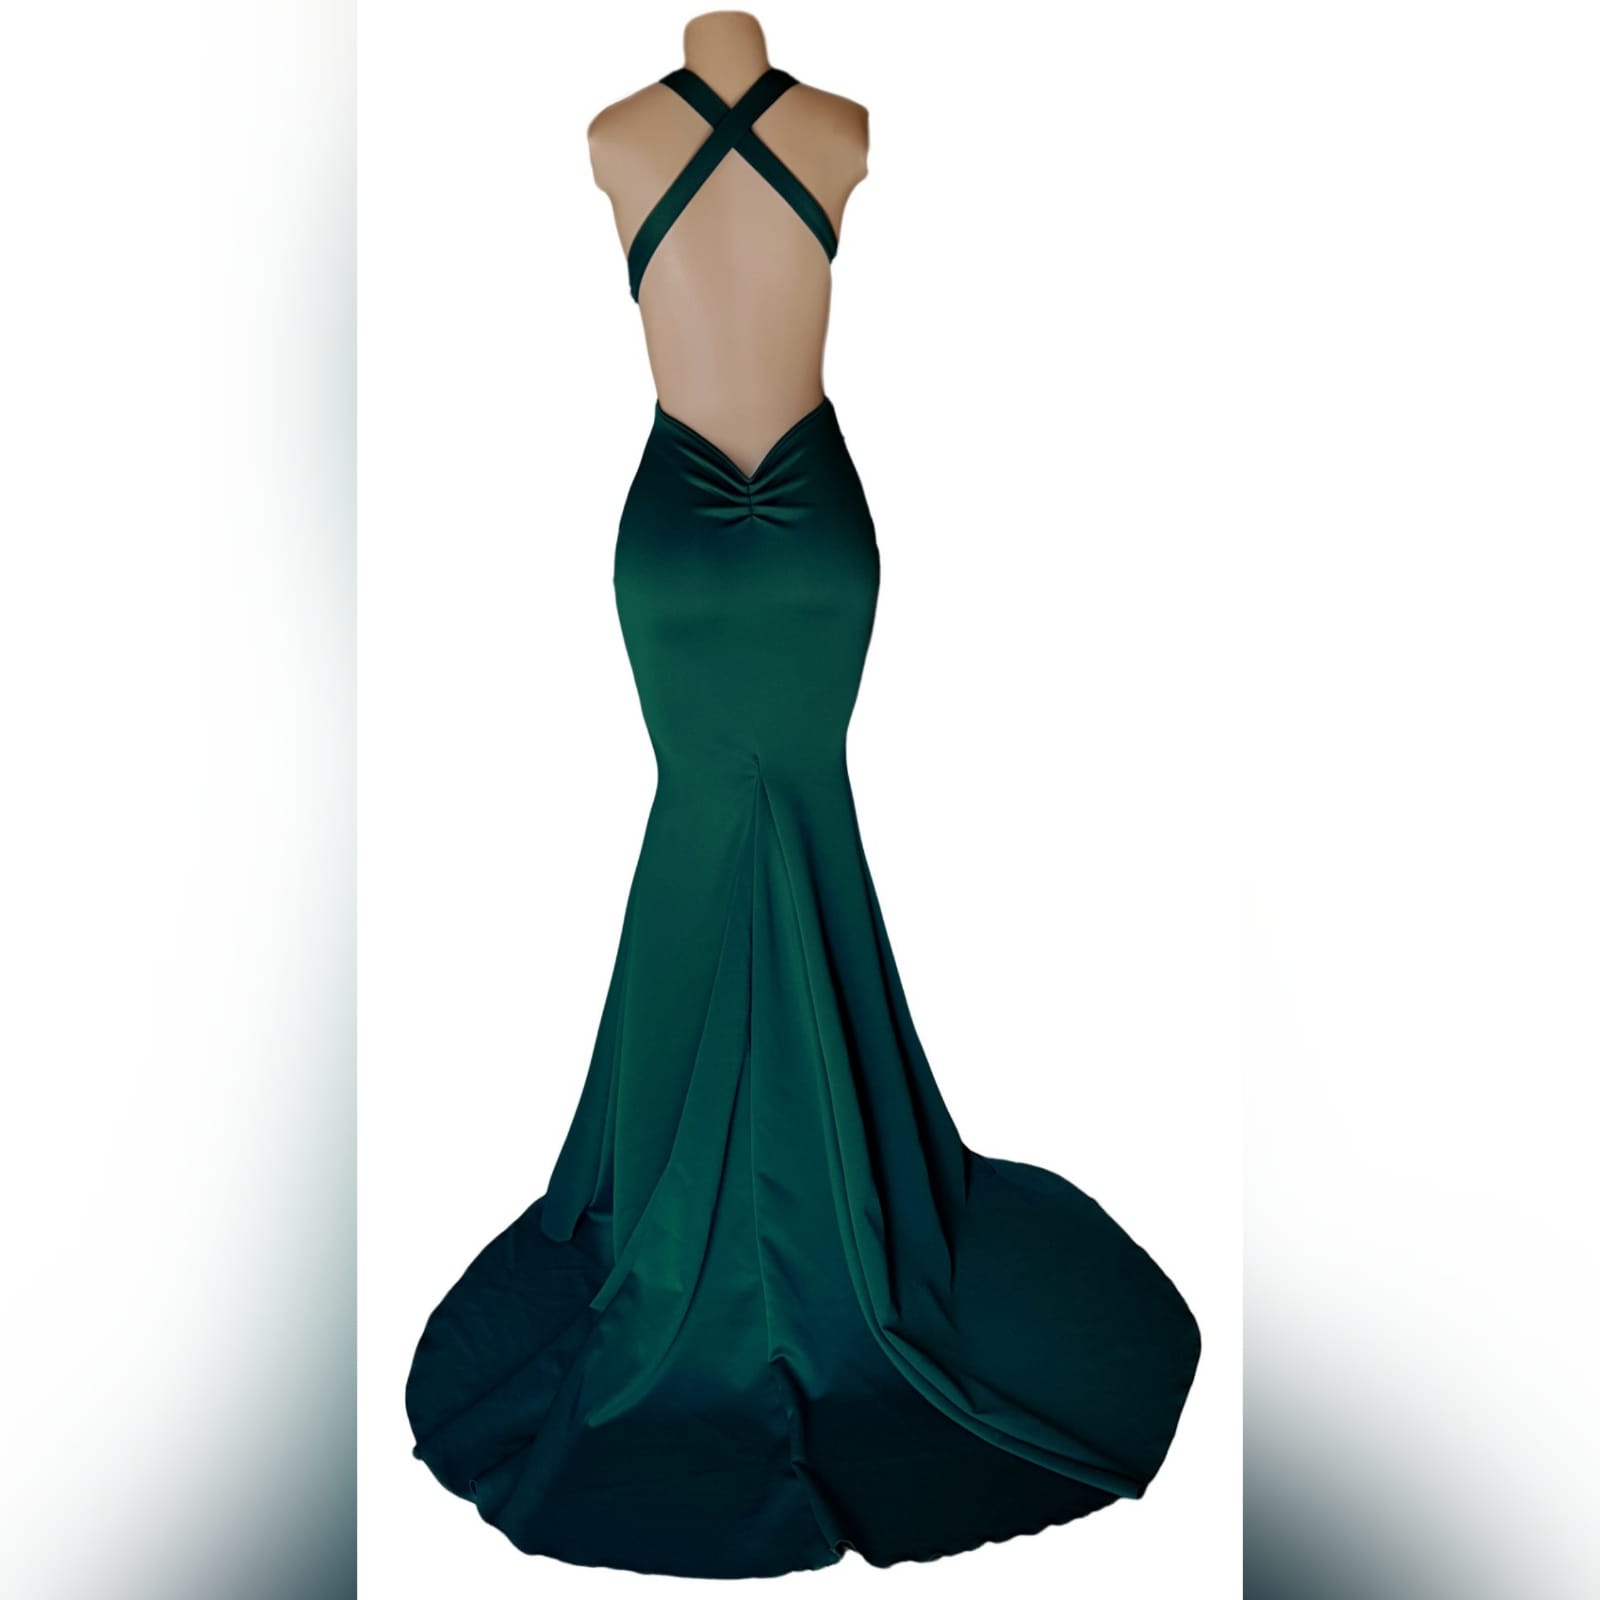 Emerald green soft mermaid prom dress 6 emerald green soft mermaid prom dress, with a v neckline, low open v back with pleated detail and crossed straps, with a train.